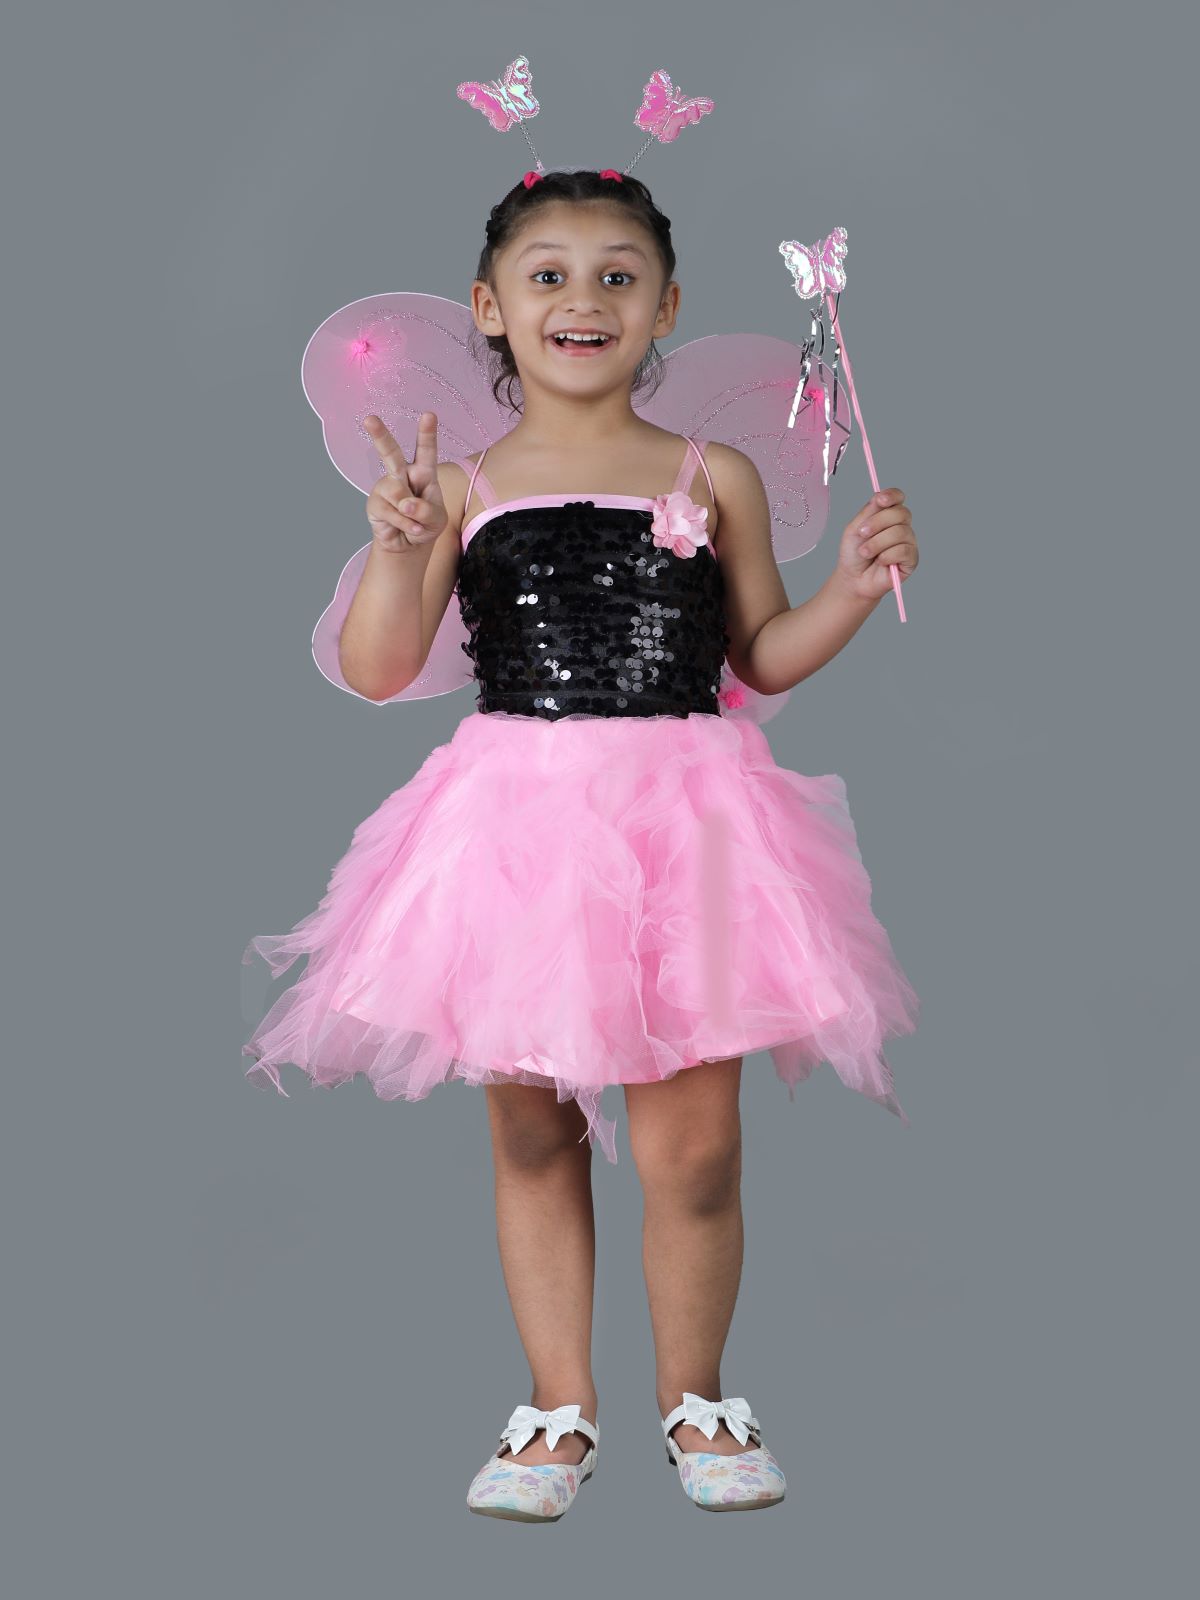 Buy BookMyCostume Fairy Angel with Pink Wings Girls Kids Fancy Dress Costume  10-12 years Online at Low Prices in India - Amazon.in